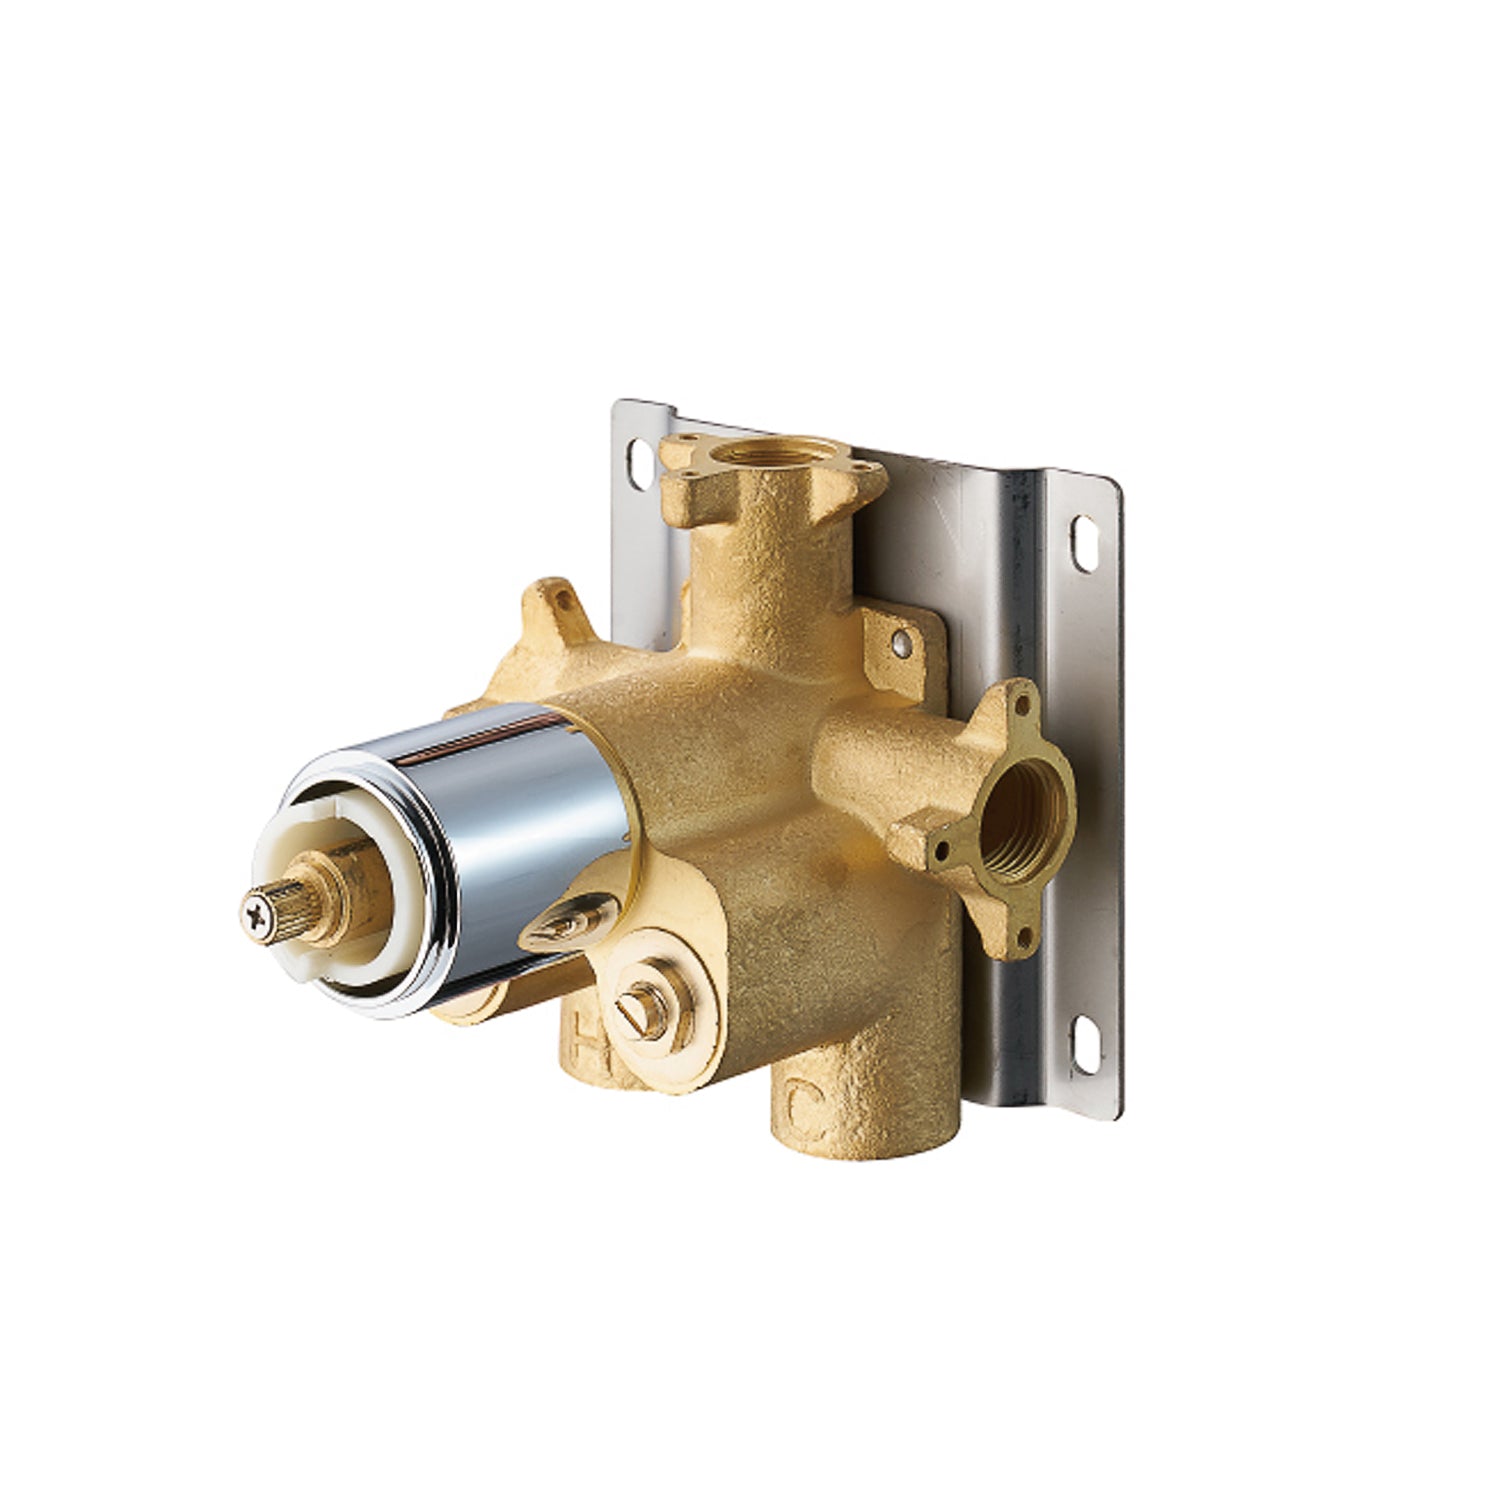 Dax Concealed Valve Thermostatic Mixer  (DAX-1050-CR)